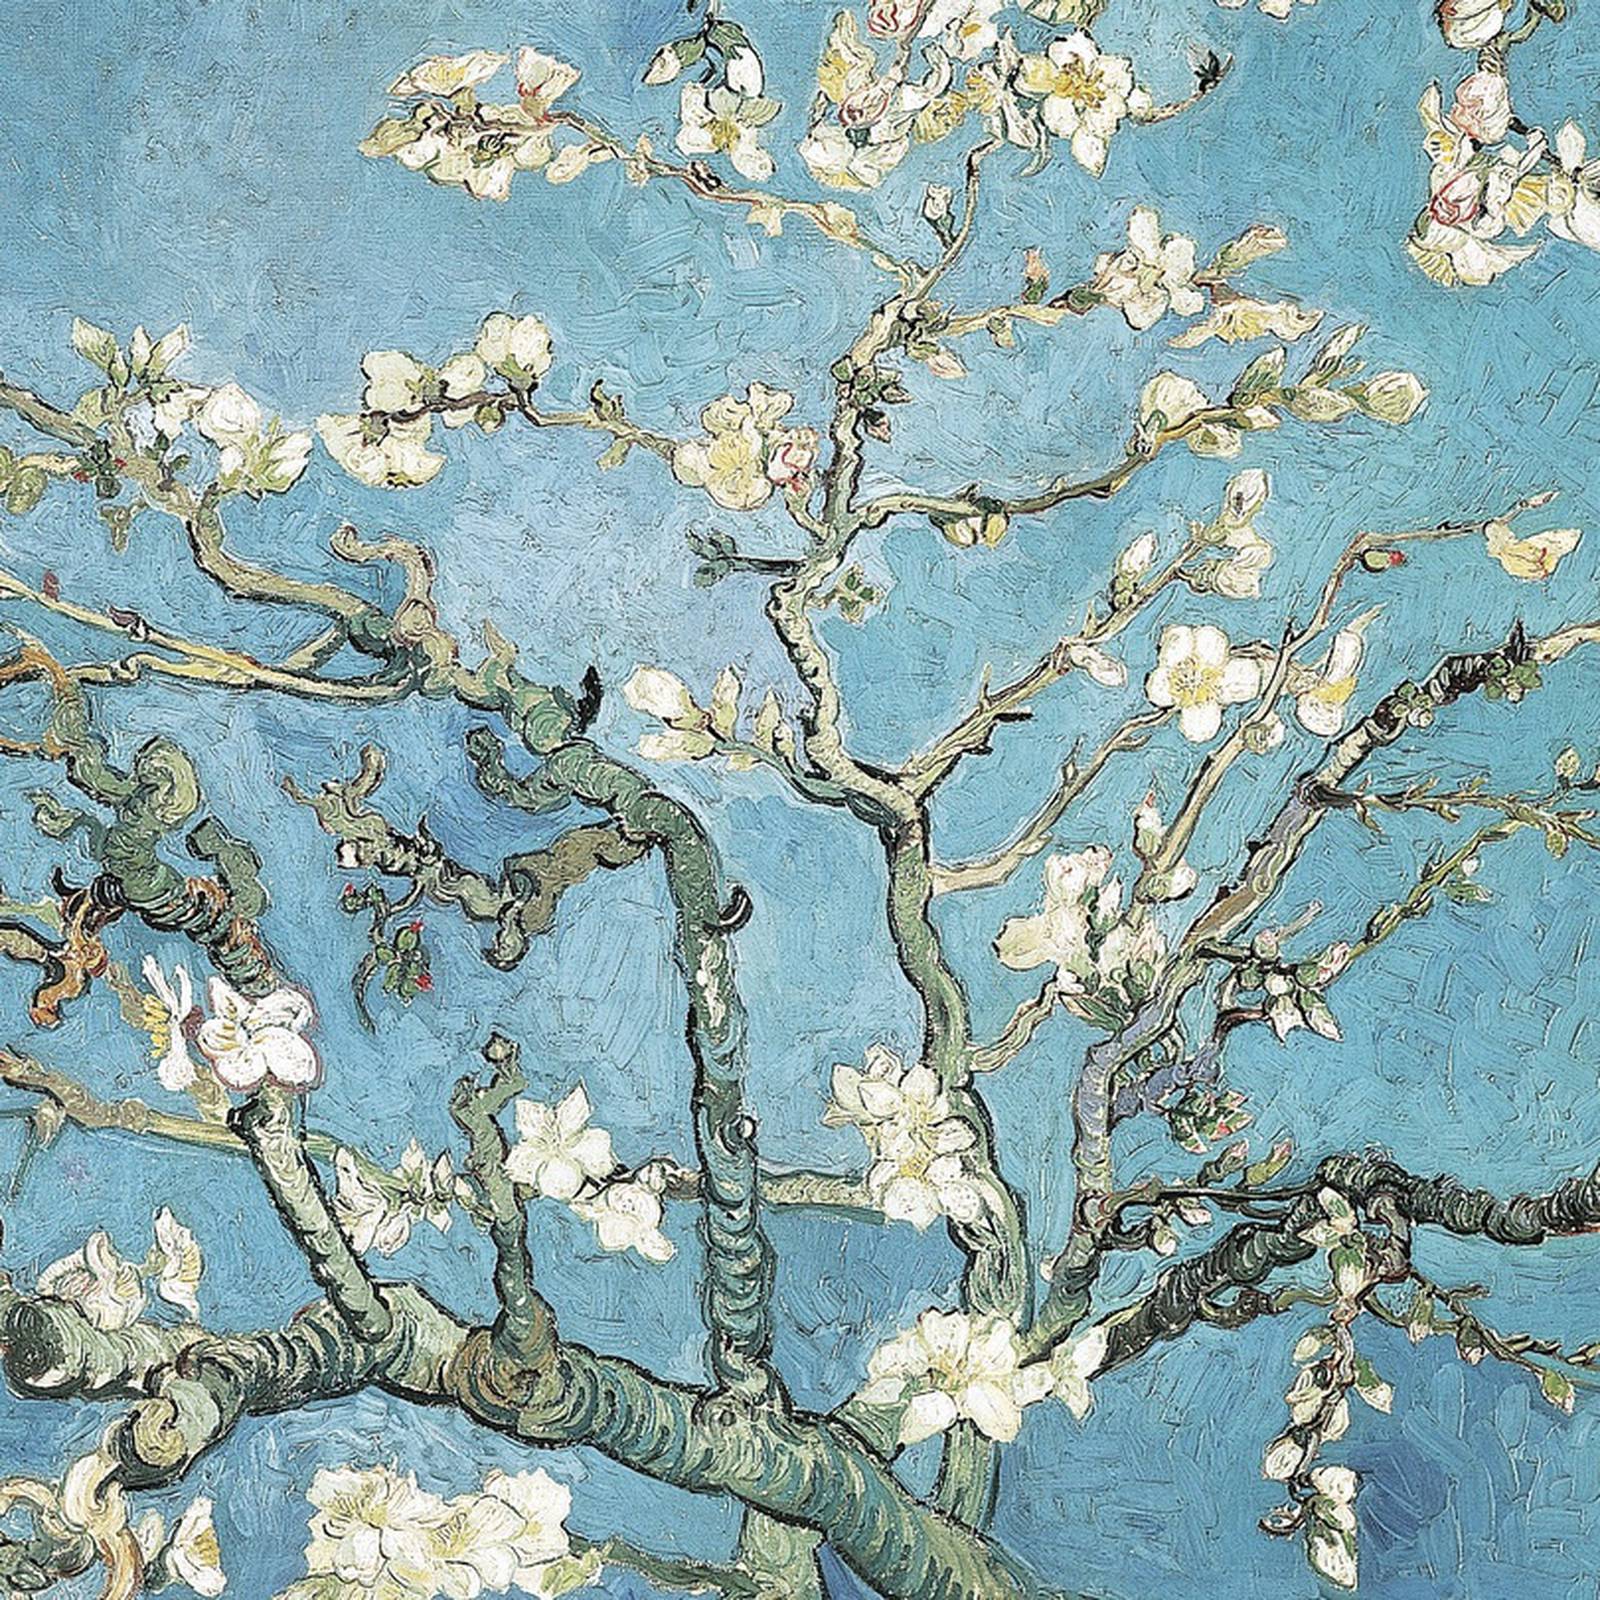 Adult Jigsaw Puzzle Vincent van Gogh: Almond Blossom - Book Summary & Video, Official Publisher Page